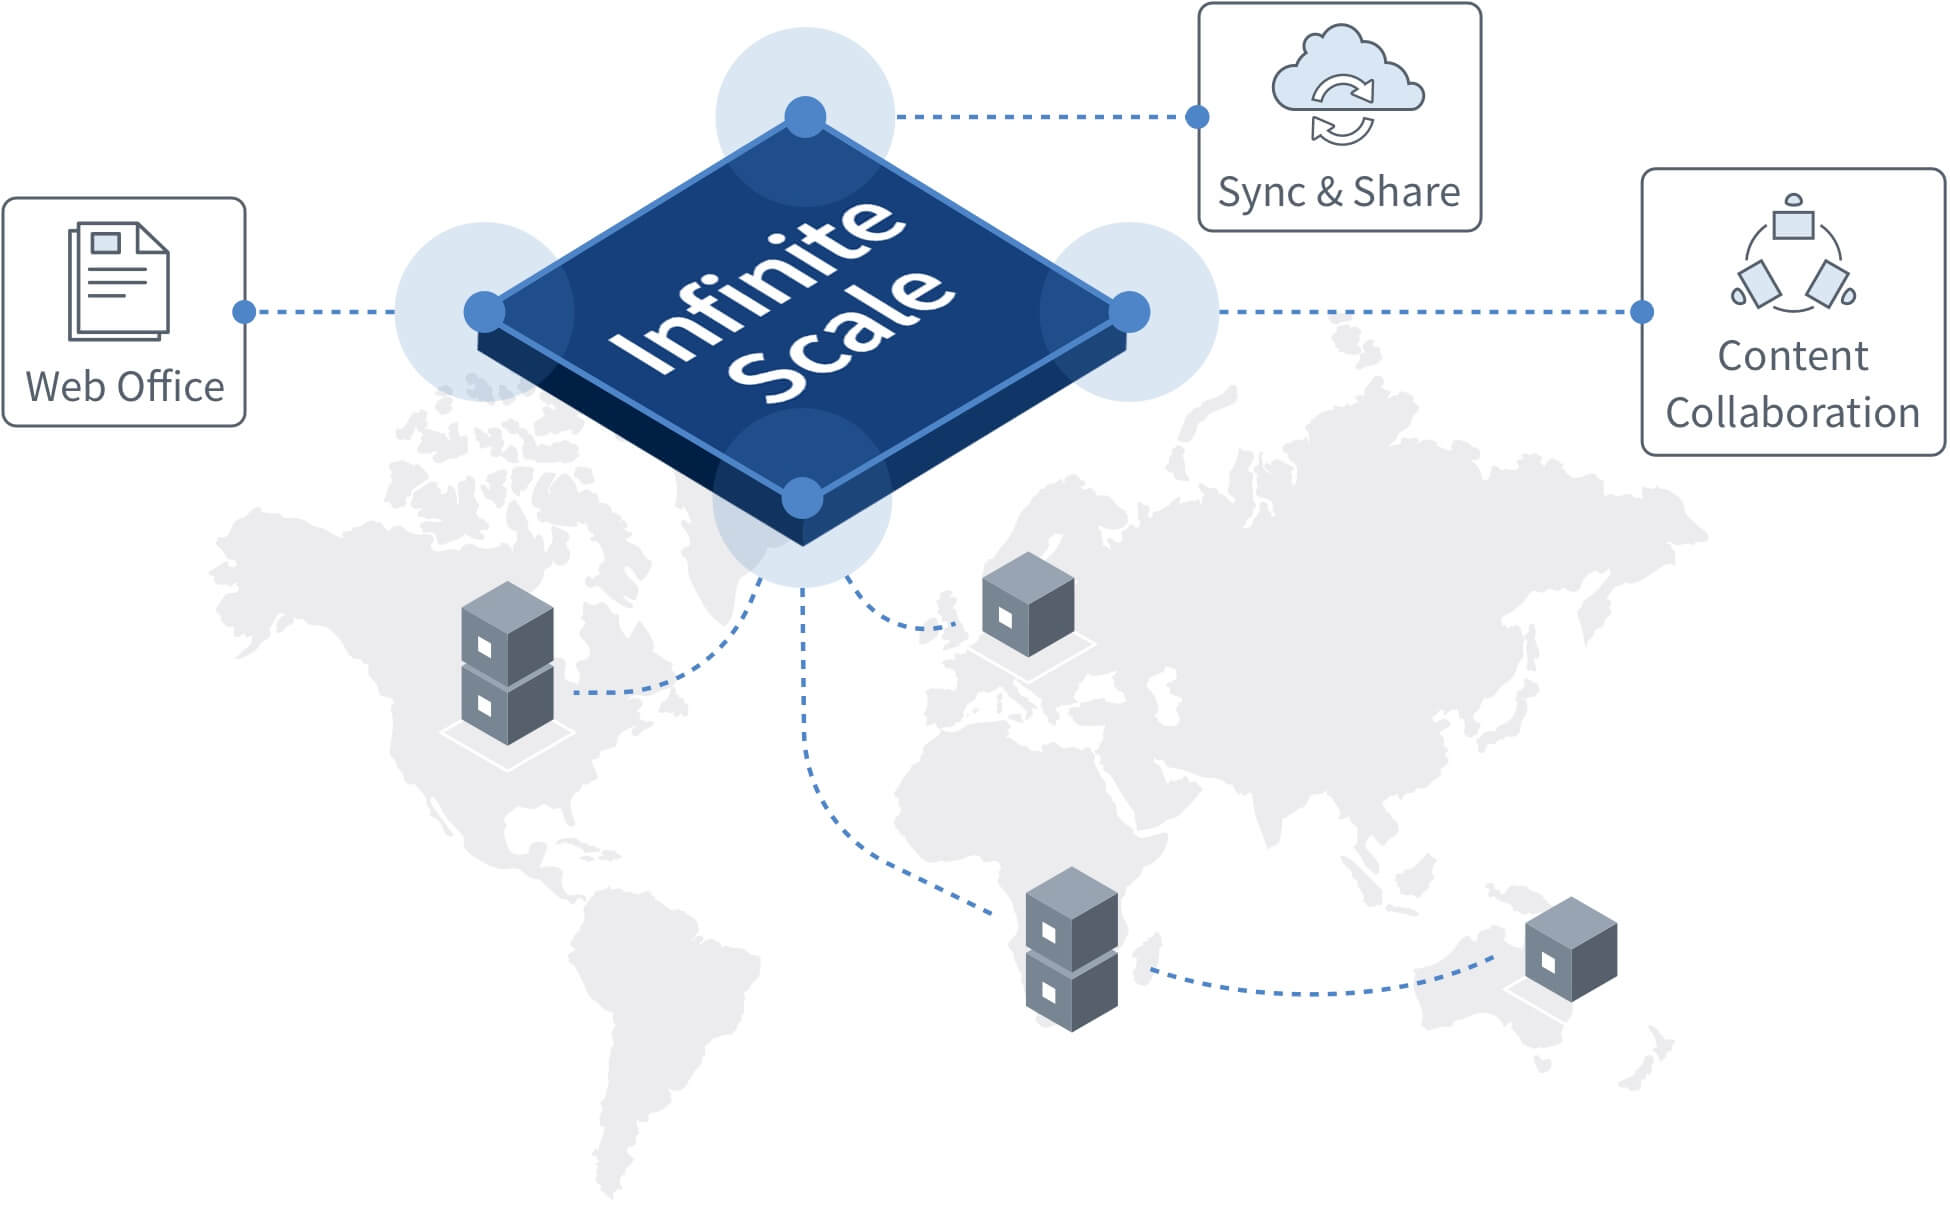 ownCloud Infinite Scale